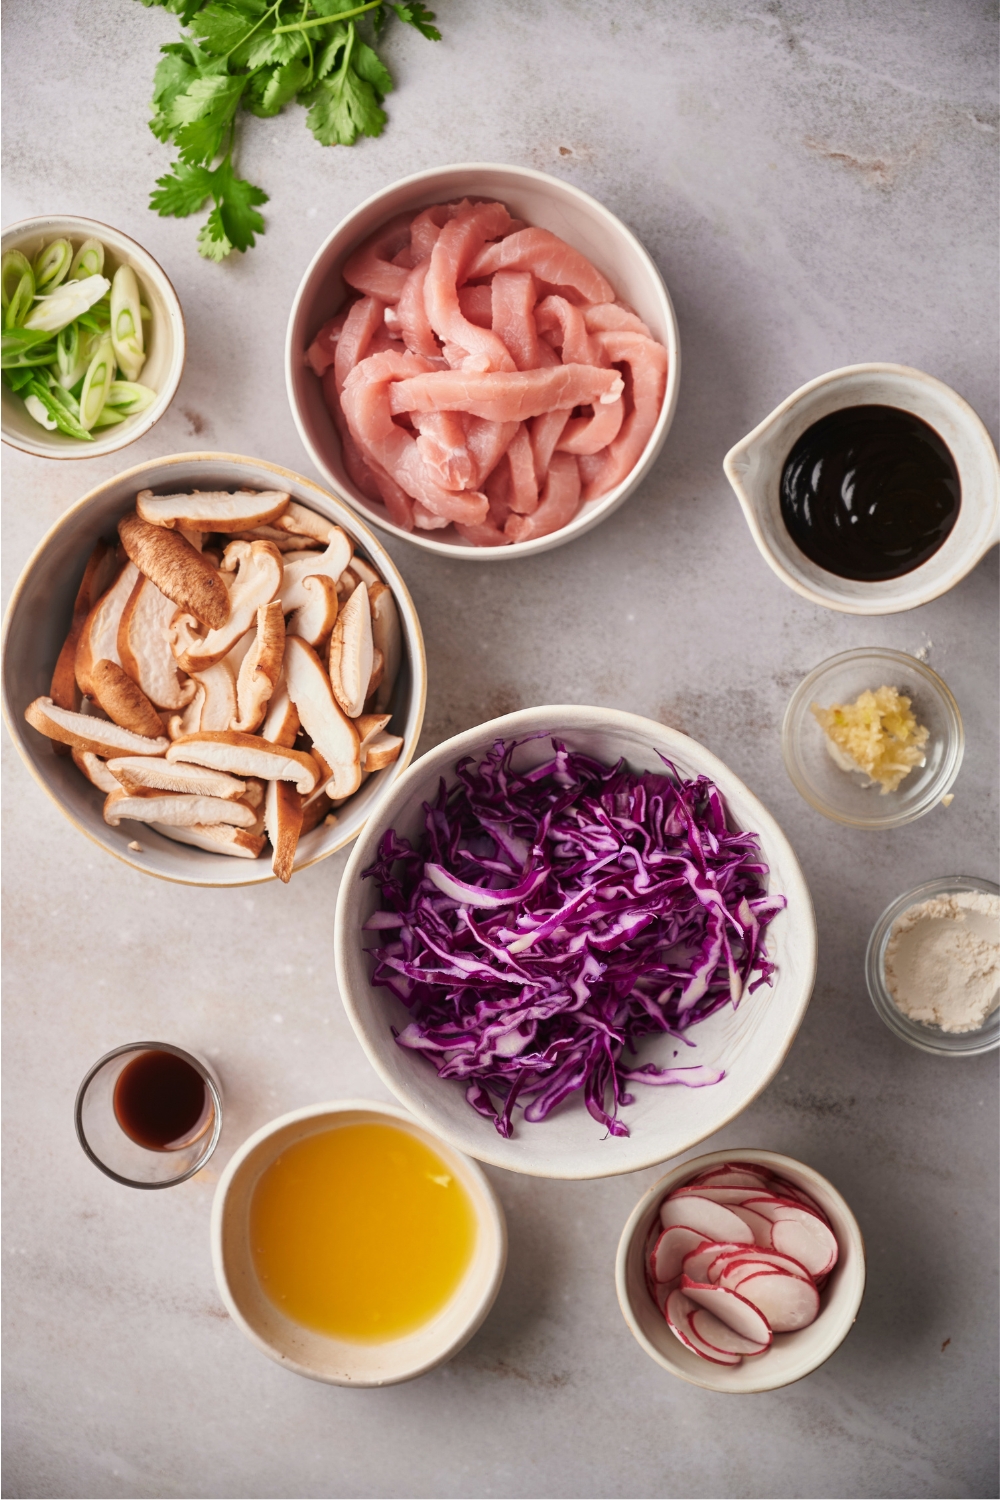 A bowl of sliced pork, a bowl of sliced mushrooms, a bowl of shredded purple cabbage, a bowl of radishes, and a bowl of broth all on a grey counter.